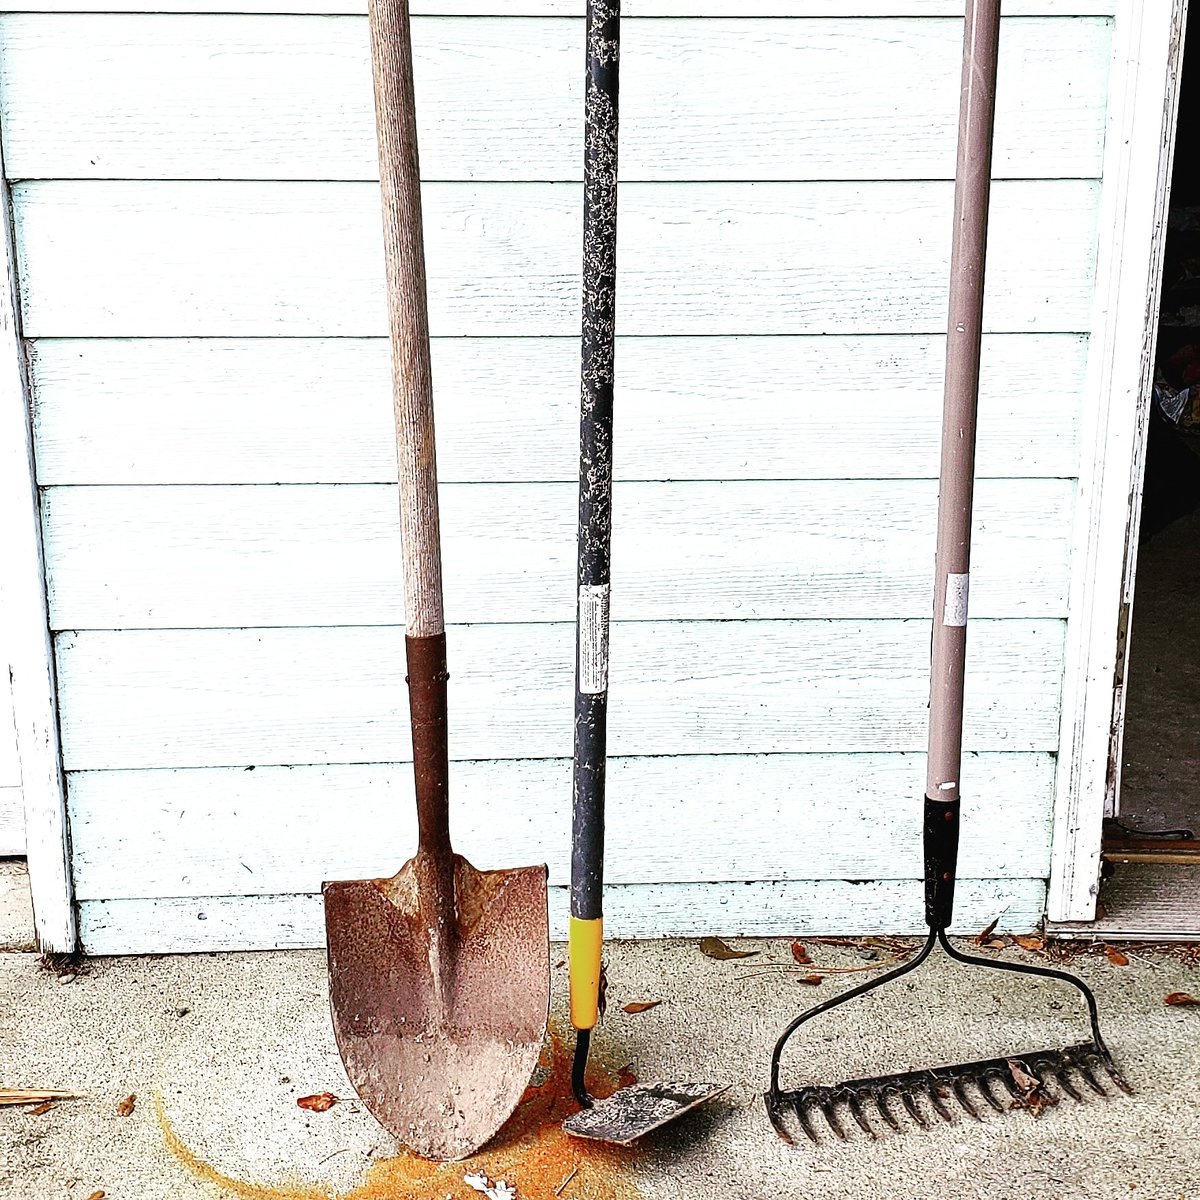 Was getting a ton done 💪until a thunderstorm ⛈ decided I needed a break 😂 inside I go for more packing 📦

#craftycoffeemomma #girlpower #yardwork #landscaping #mompower #shovels #gardens #gardenfacelift #gardening #gardeninglife #tips #outdoortips #help #helpful #outdoorlife